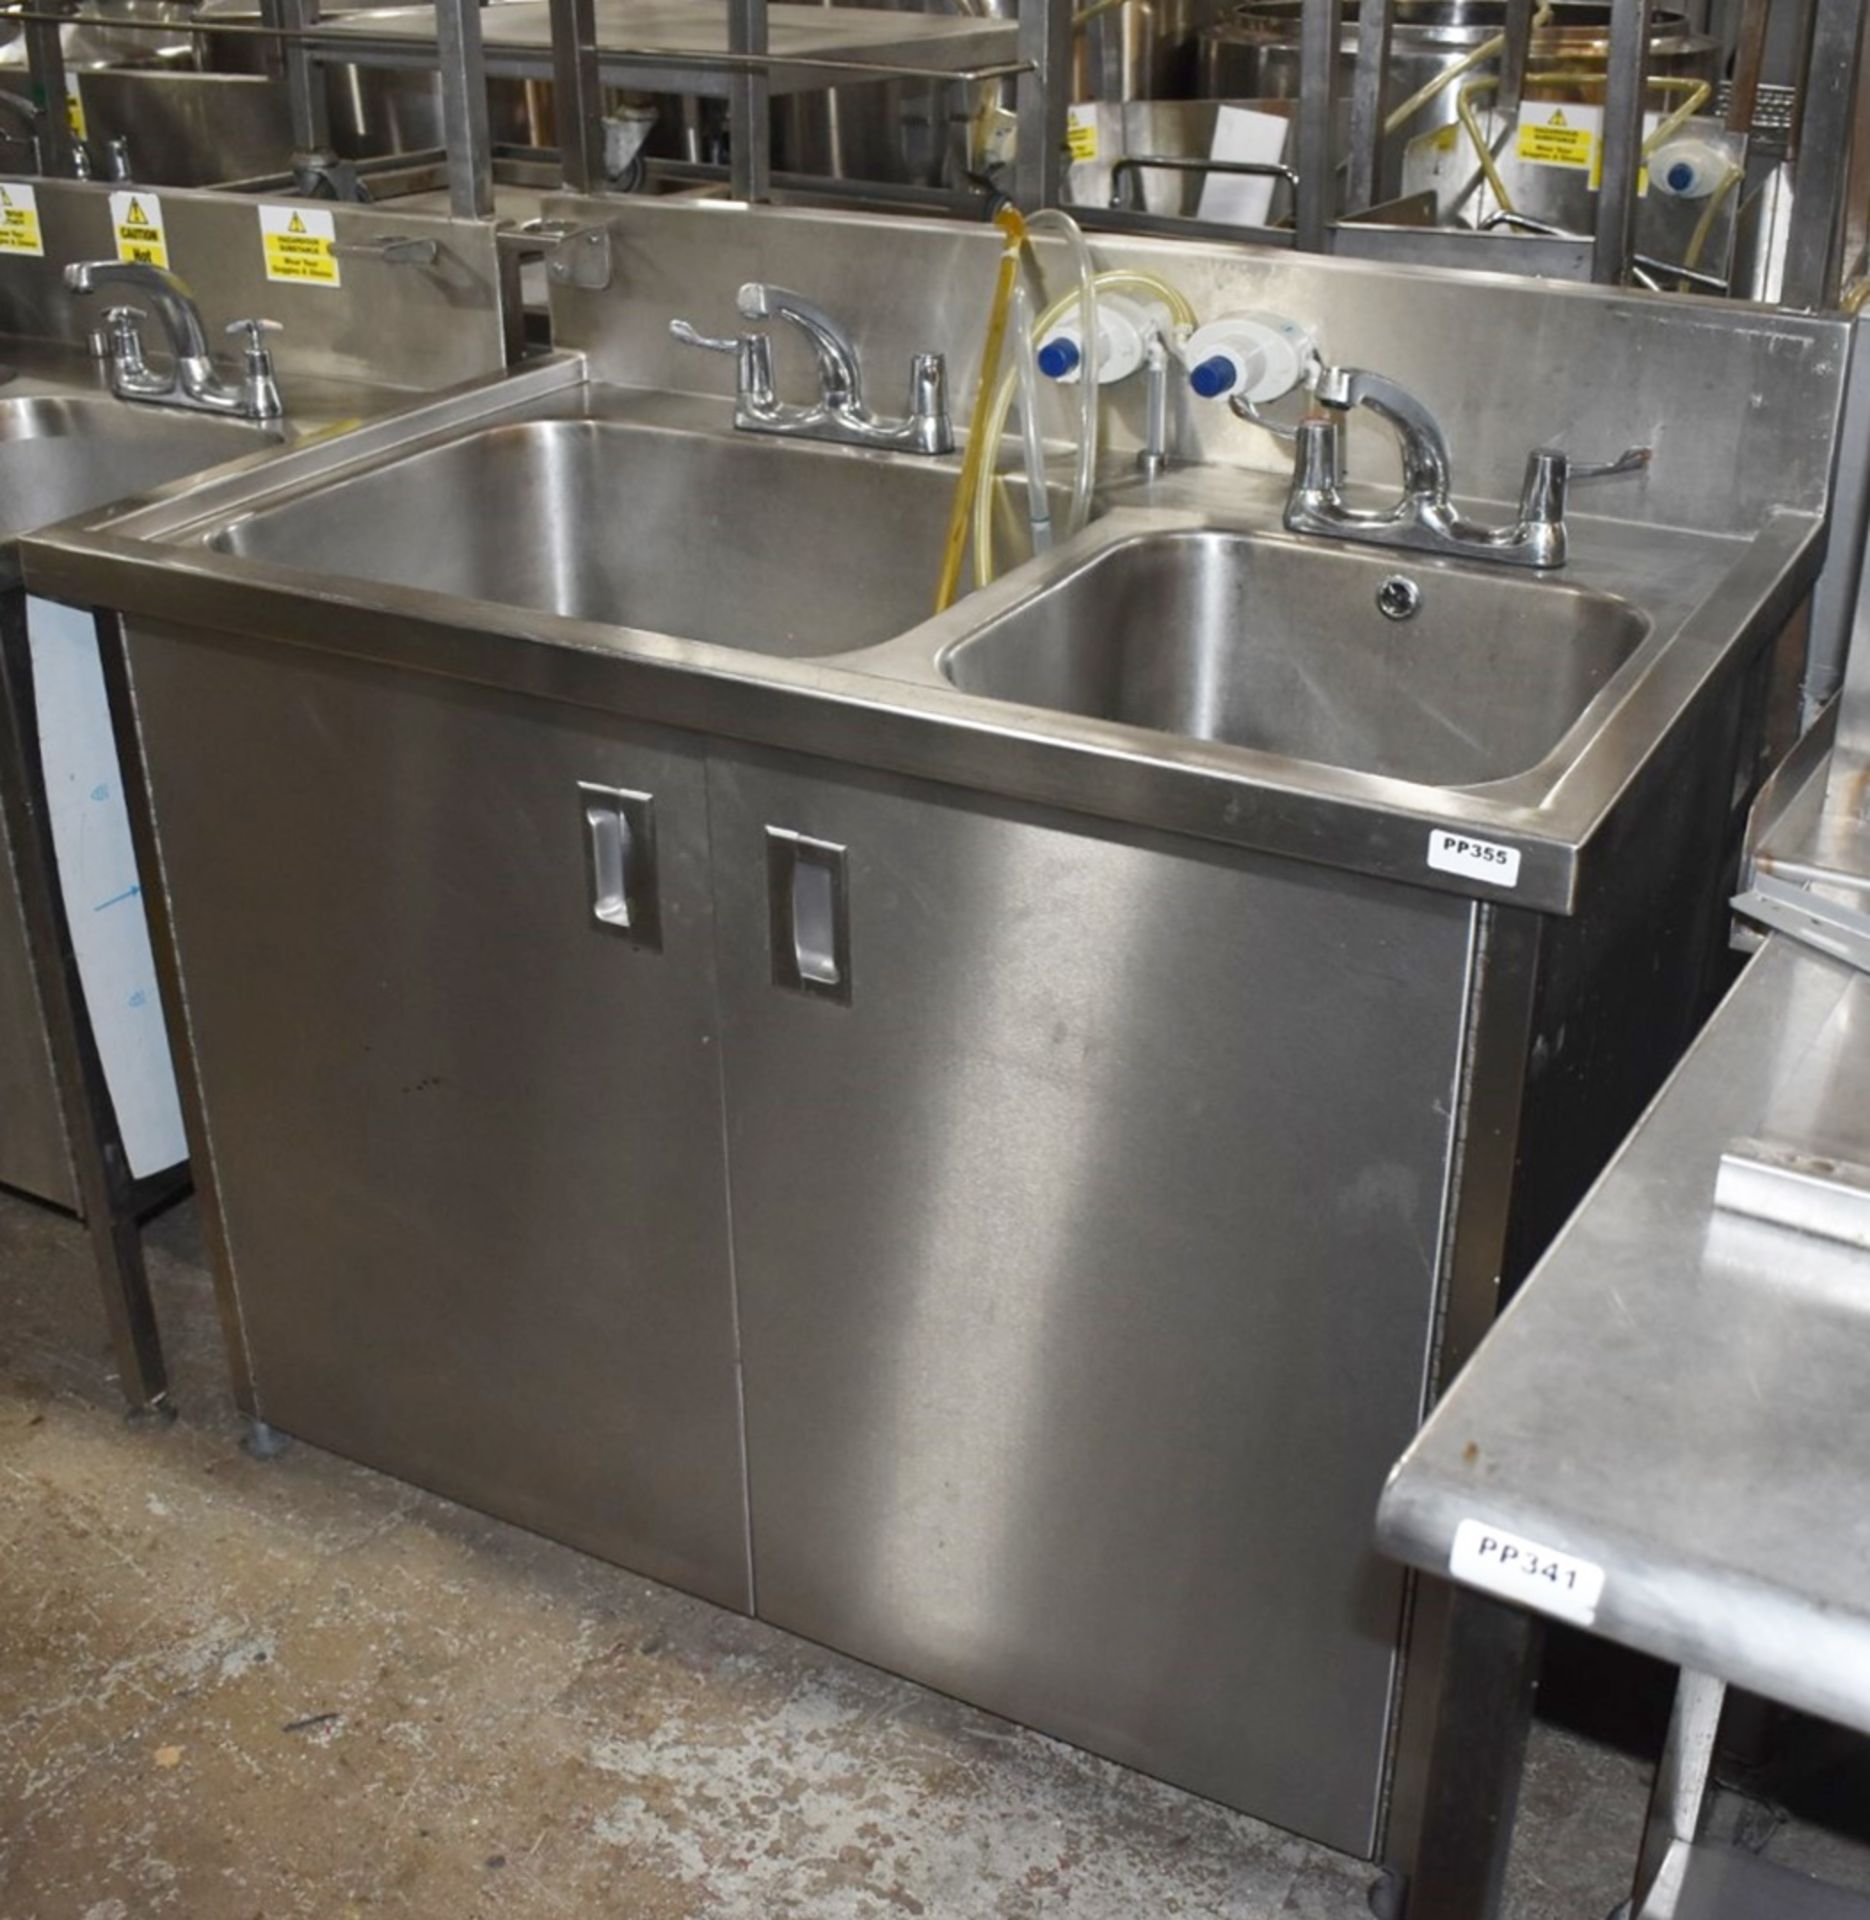 1 x Commercial Kitchen Wash Station With Two Large Sink Bowls, Mixer Taps, Overhead Drying Rack